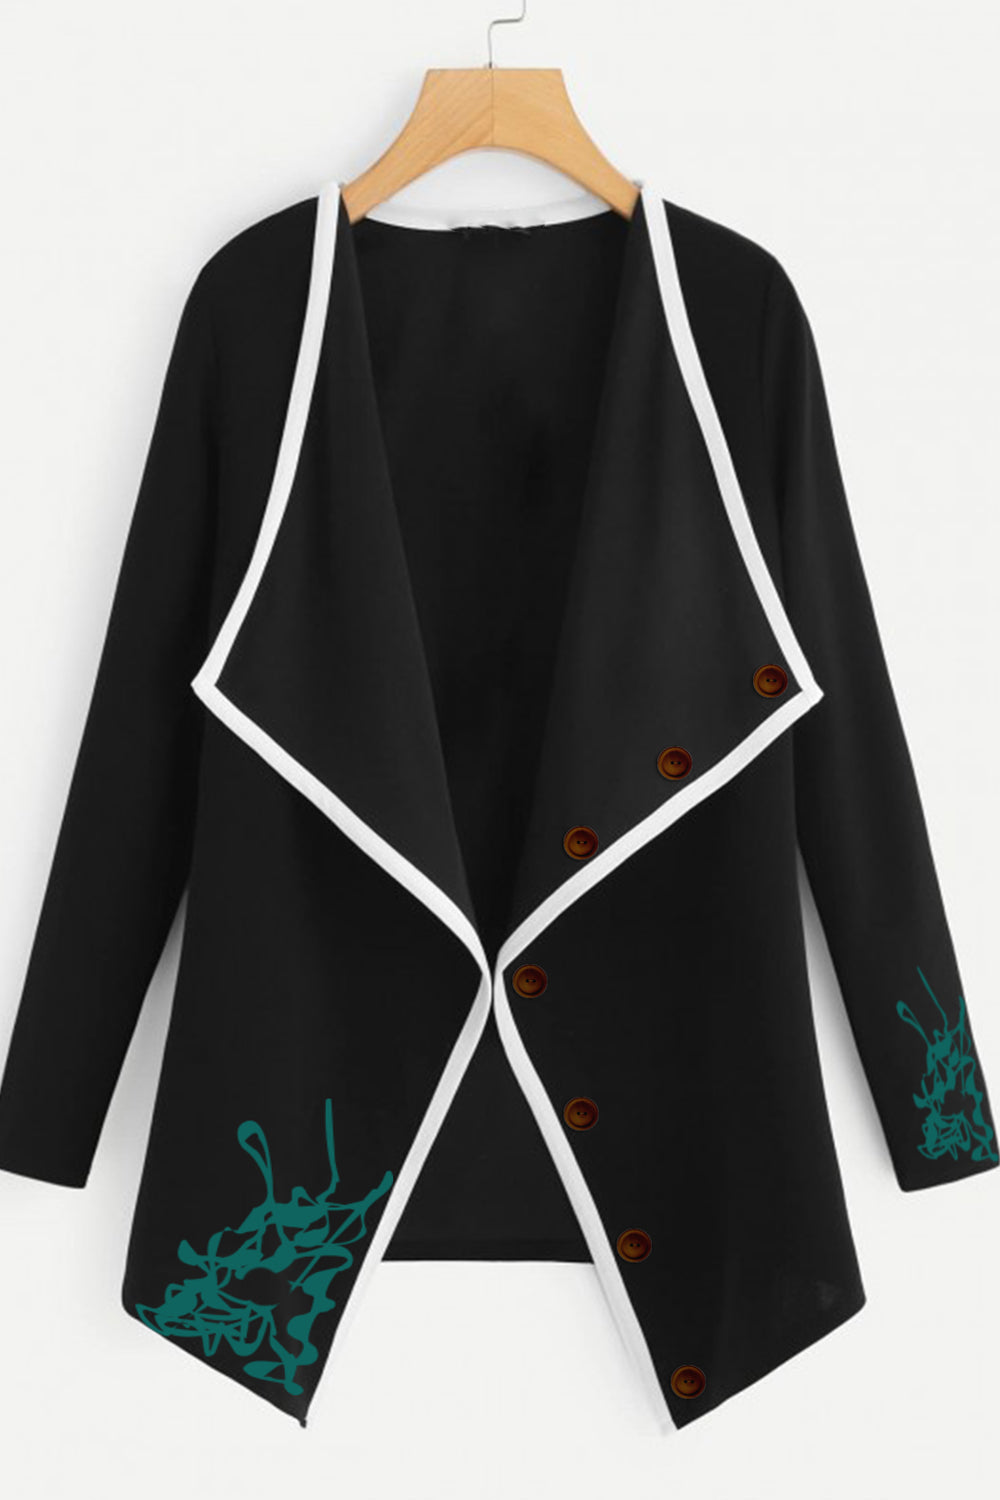 BAEF Black and White Jacket with Green Graphic Print